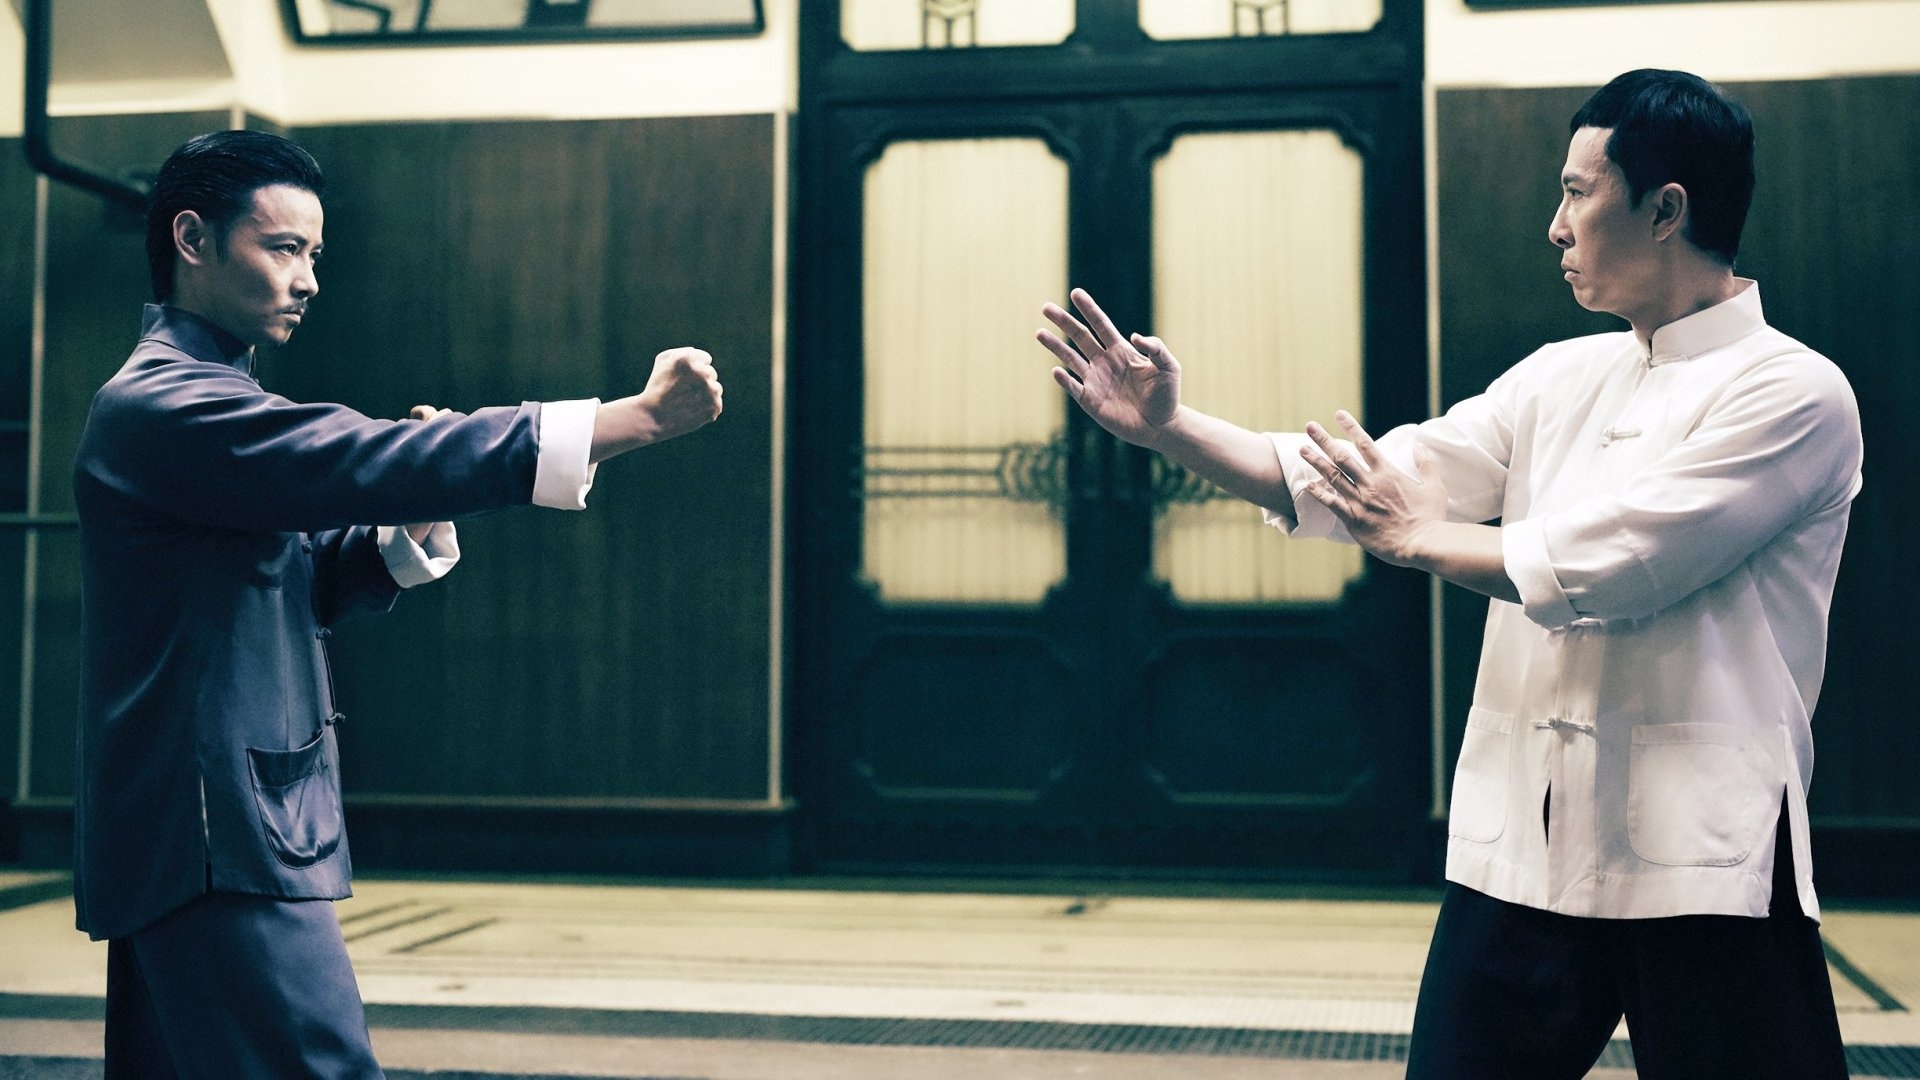 Ip Man: Films directed by Wilson Yip, written by Edmond Wong and produced by Raymond Wong. 1920x1080 Full HD Background.